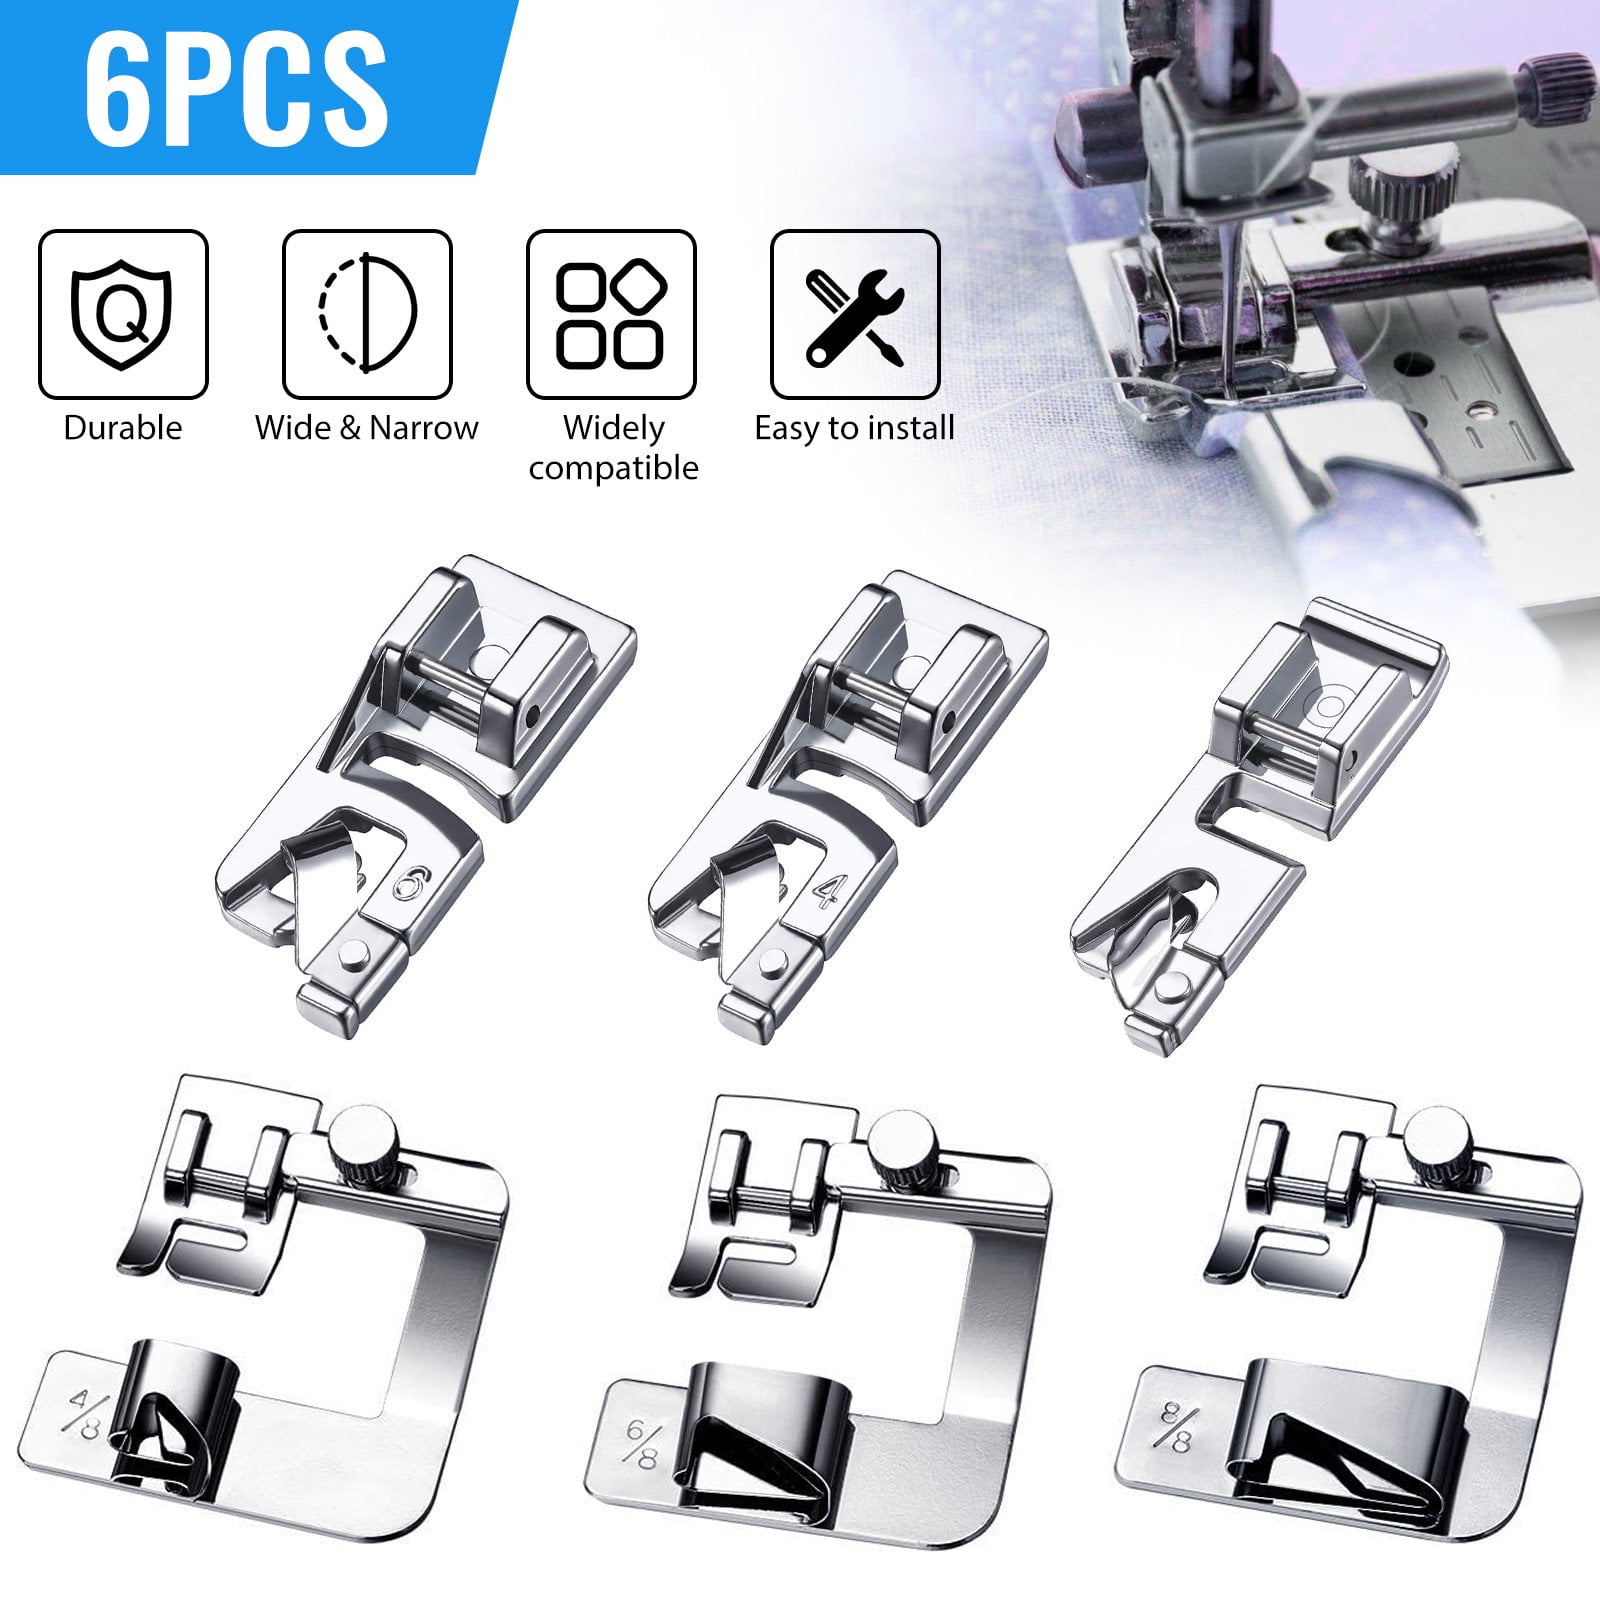 3 Pcs Rolled Hem Presser Foot, Sewing Machine Foot Set 1/2 Inch, 3/4 Inch,  1 Inch Low Shank Hemmer Presser Foot for Singer, Brother, Janome, Home